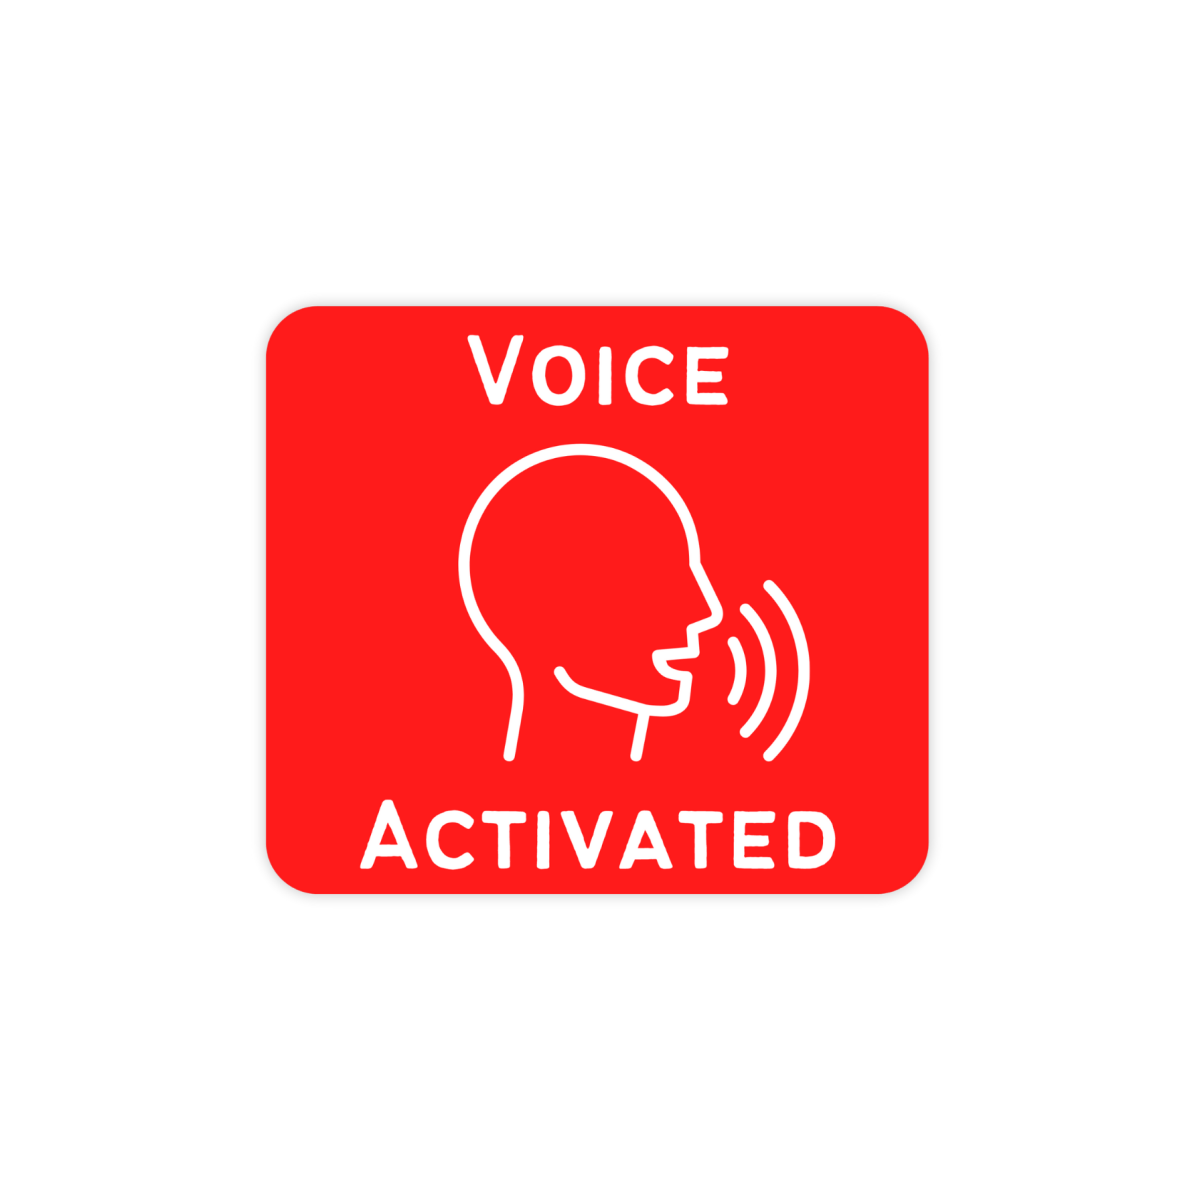 Voice Activated Funny Prank Sticker - stickerbullVoice Activated Funny Prank StickerRetail StickerstickerbullstickerbullVoiceActivated_#261Voice Activated Funny Prank Sticker